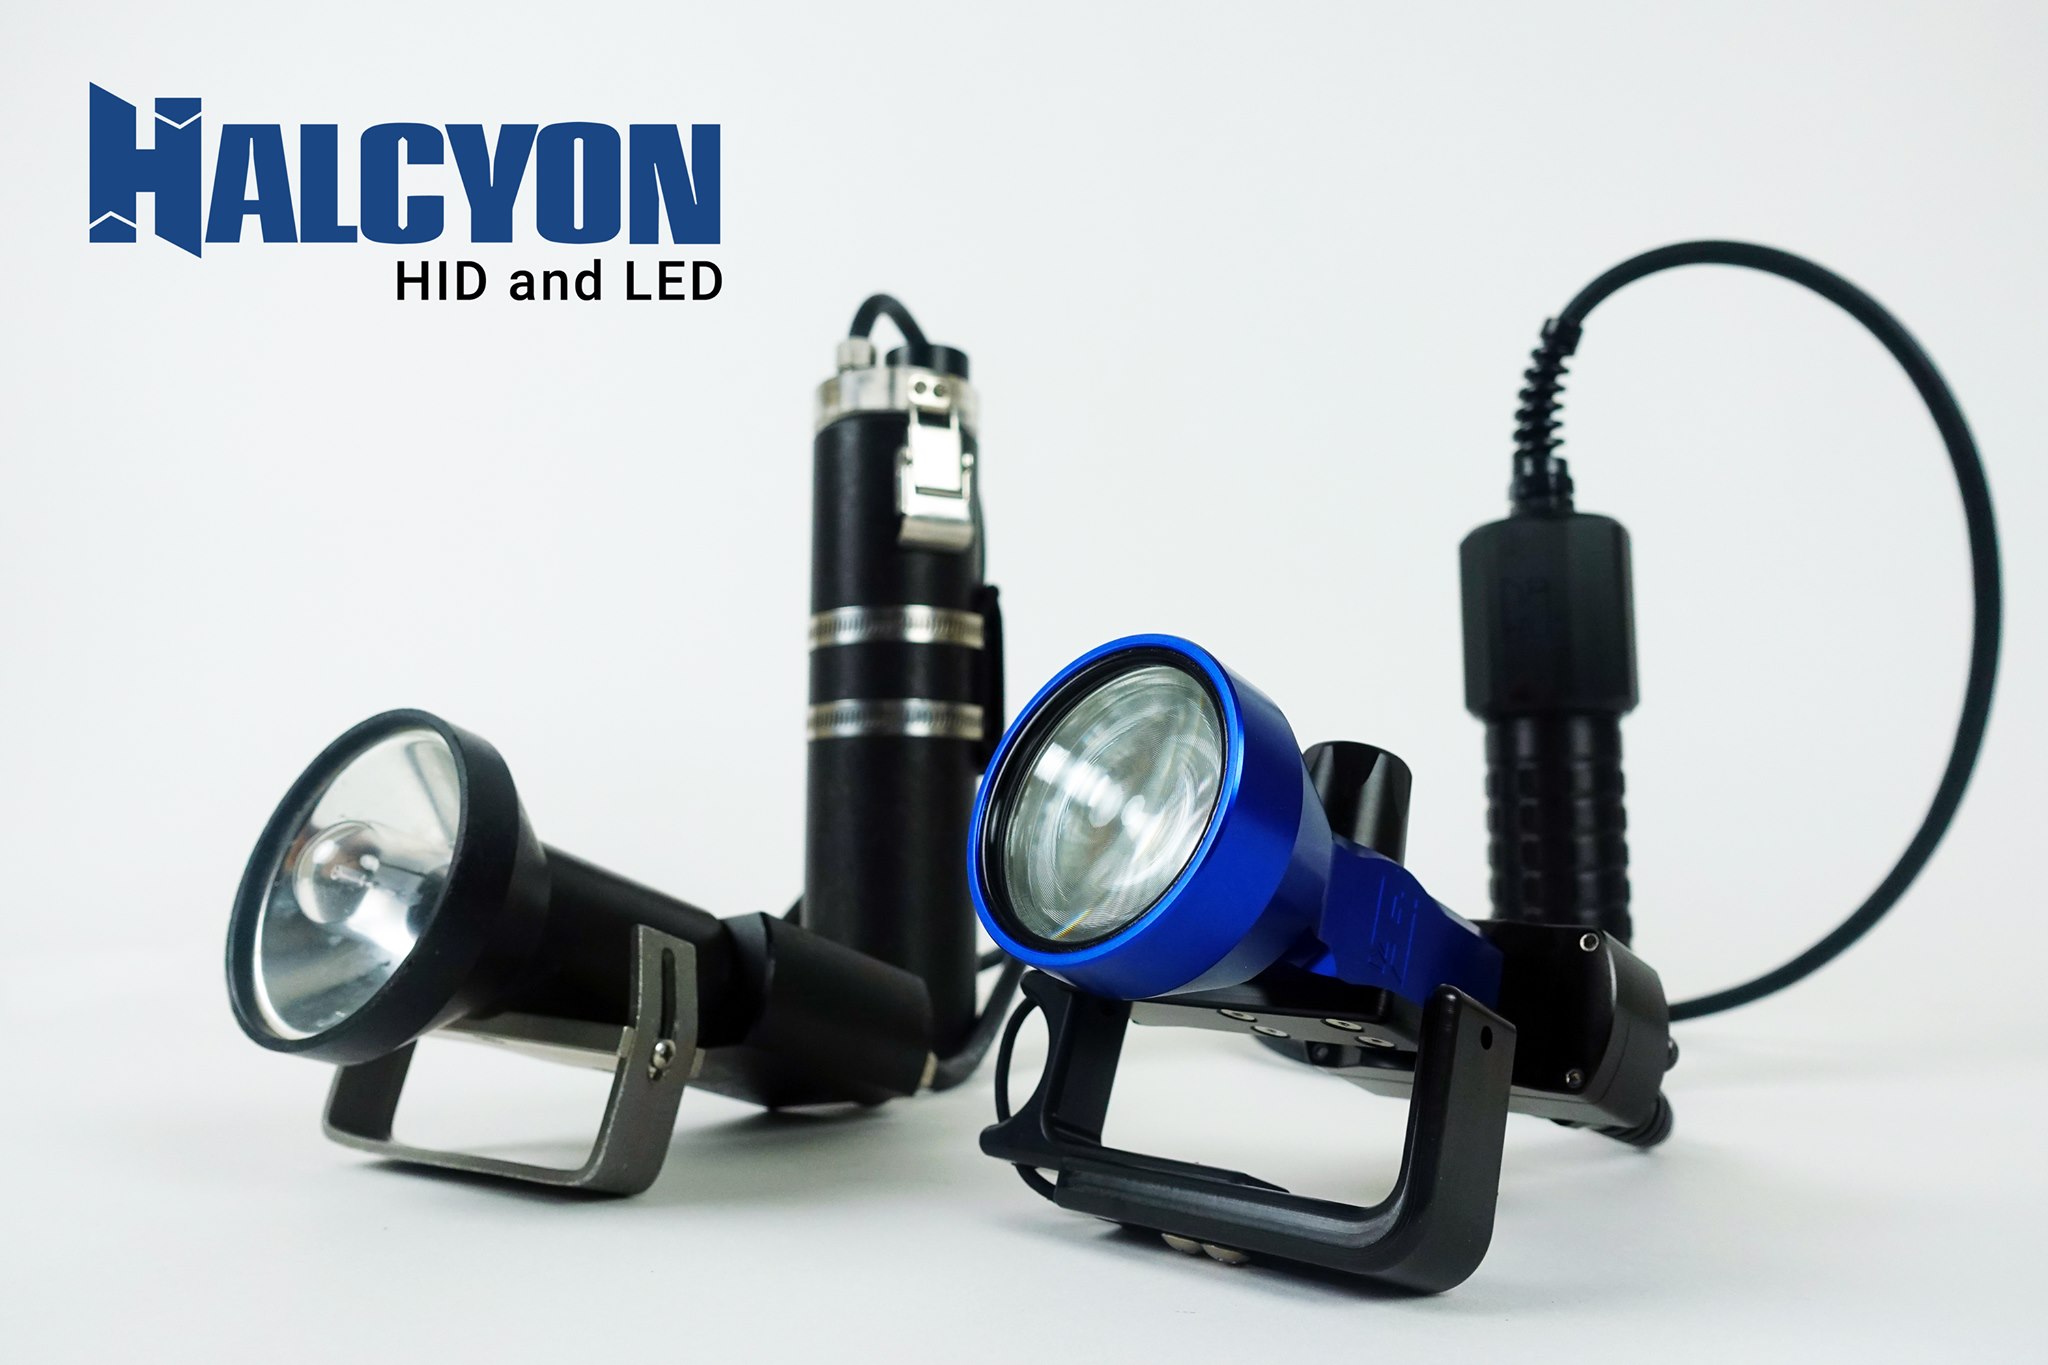 WHAT IS THE DIFFERENCE BETWEEN HID AND LED LIGHTING?